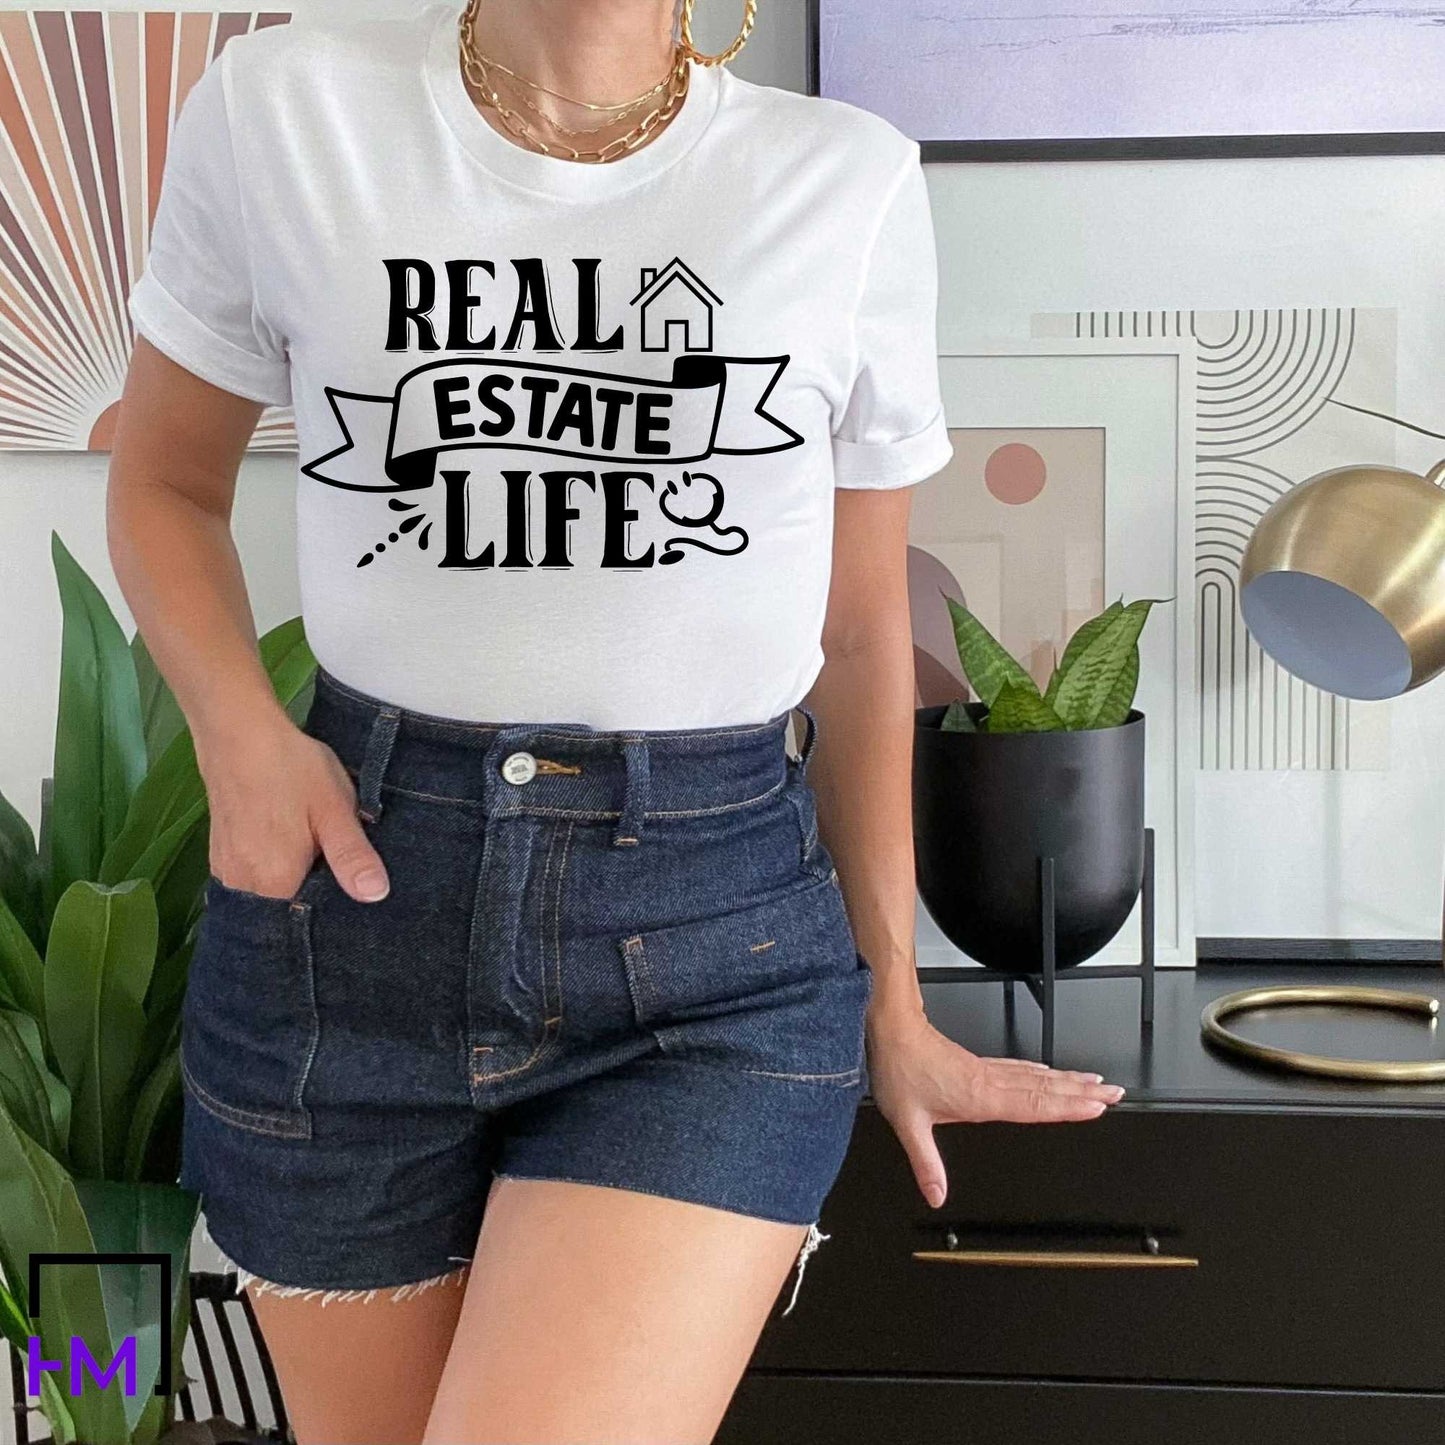 Real Estate Life Shirt, Real Estate Agent Gift, Great for Real Estate Marketing